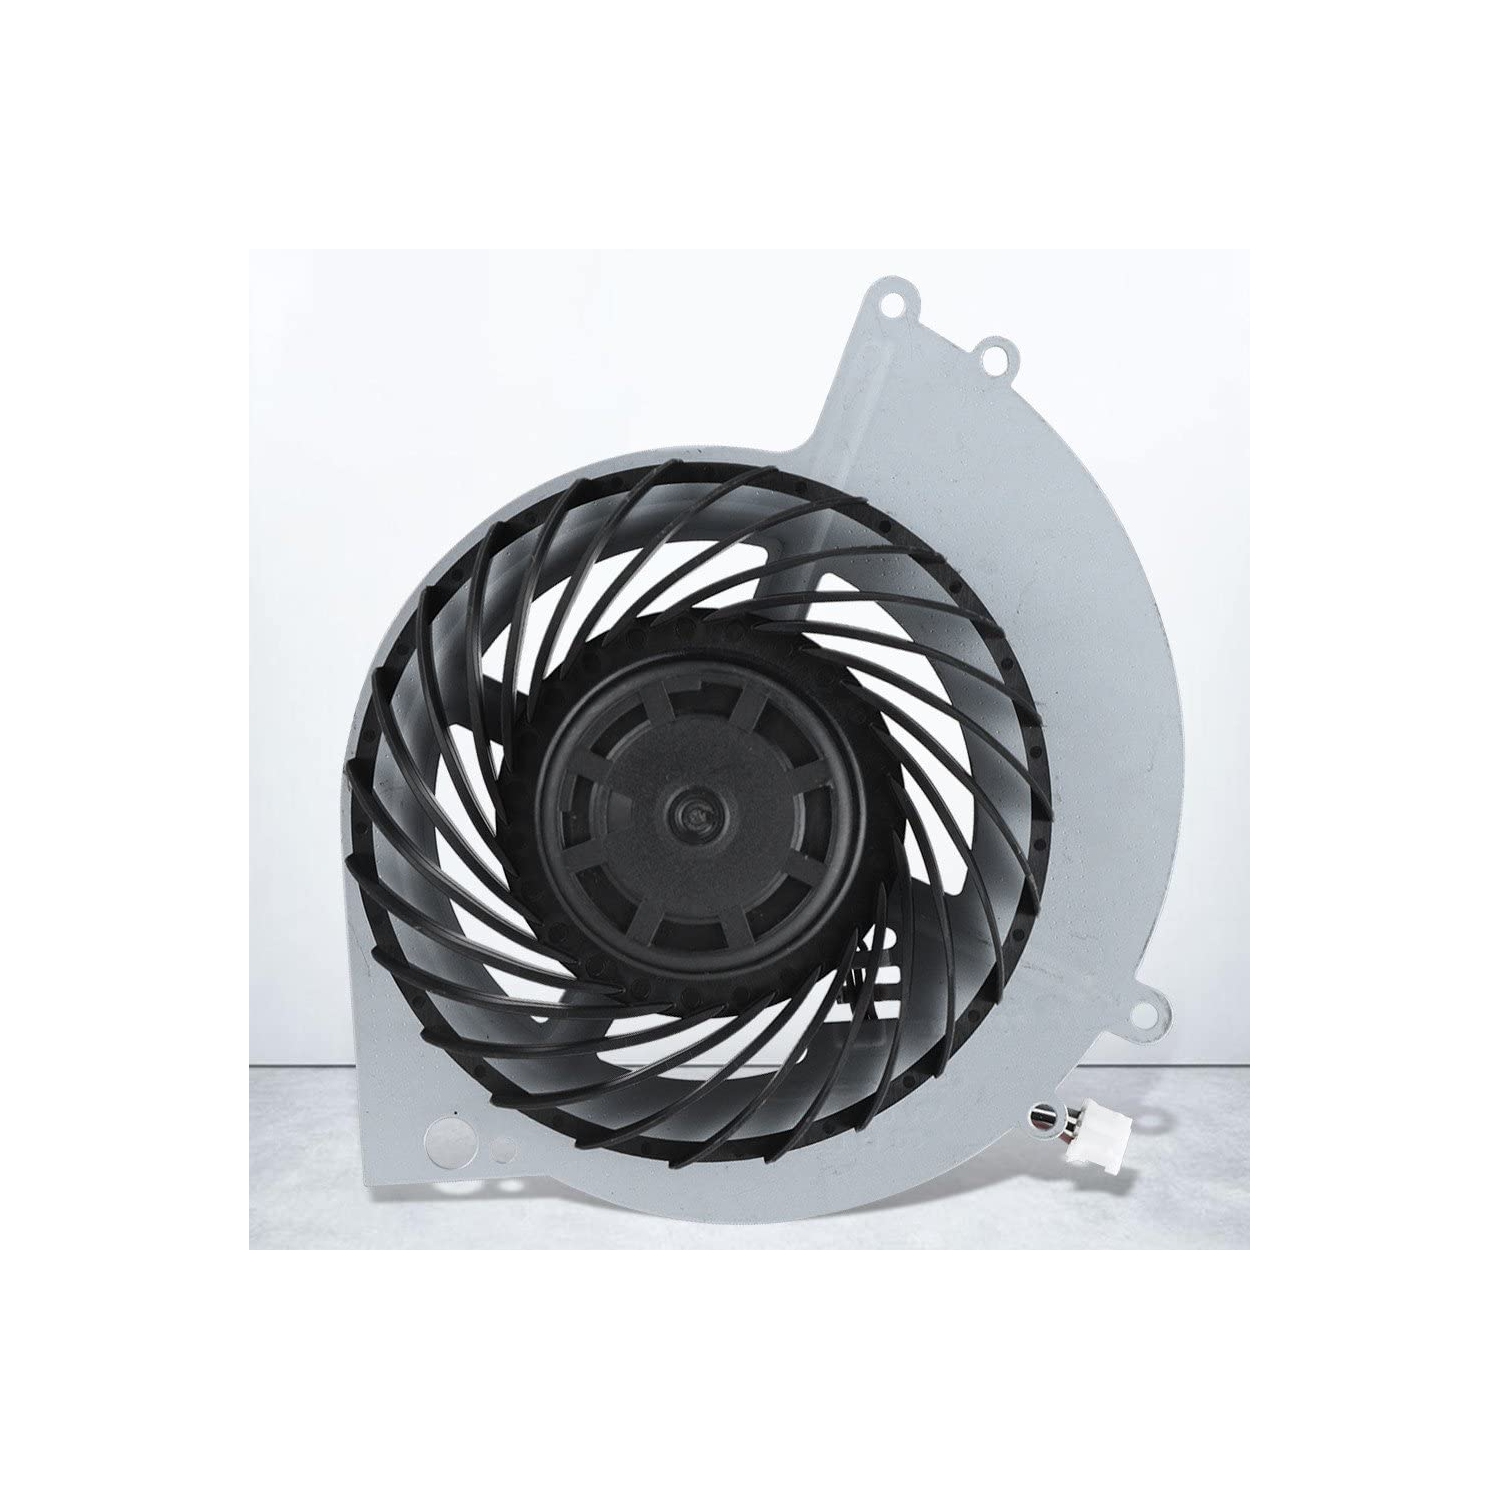 Internal ling Fan Replacement Built-in ler for Sony PS4 1200 CUH-12XX  CUH-1200 CUH-1200AB01 CUH-1200AB02